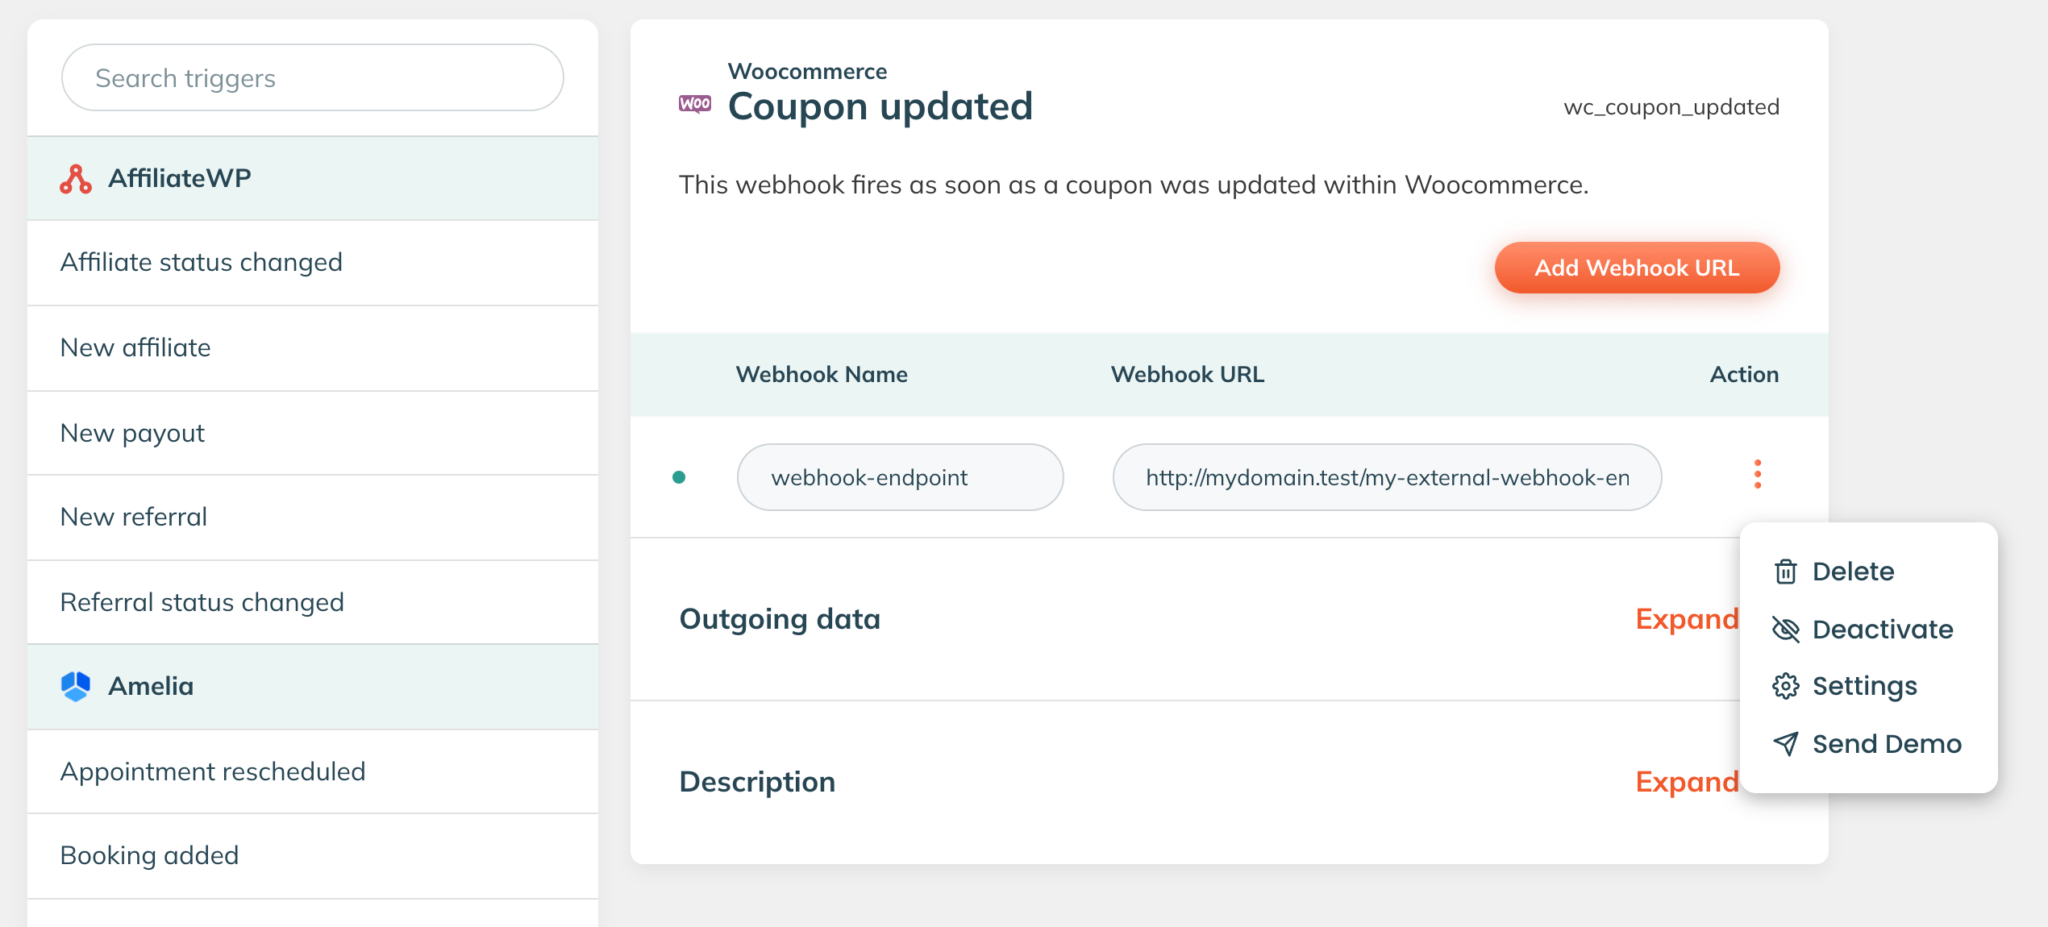 The WP Webhooks screen of the Tag added trigger